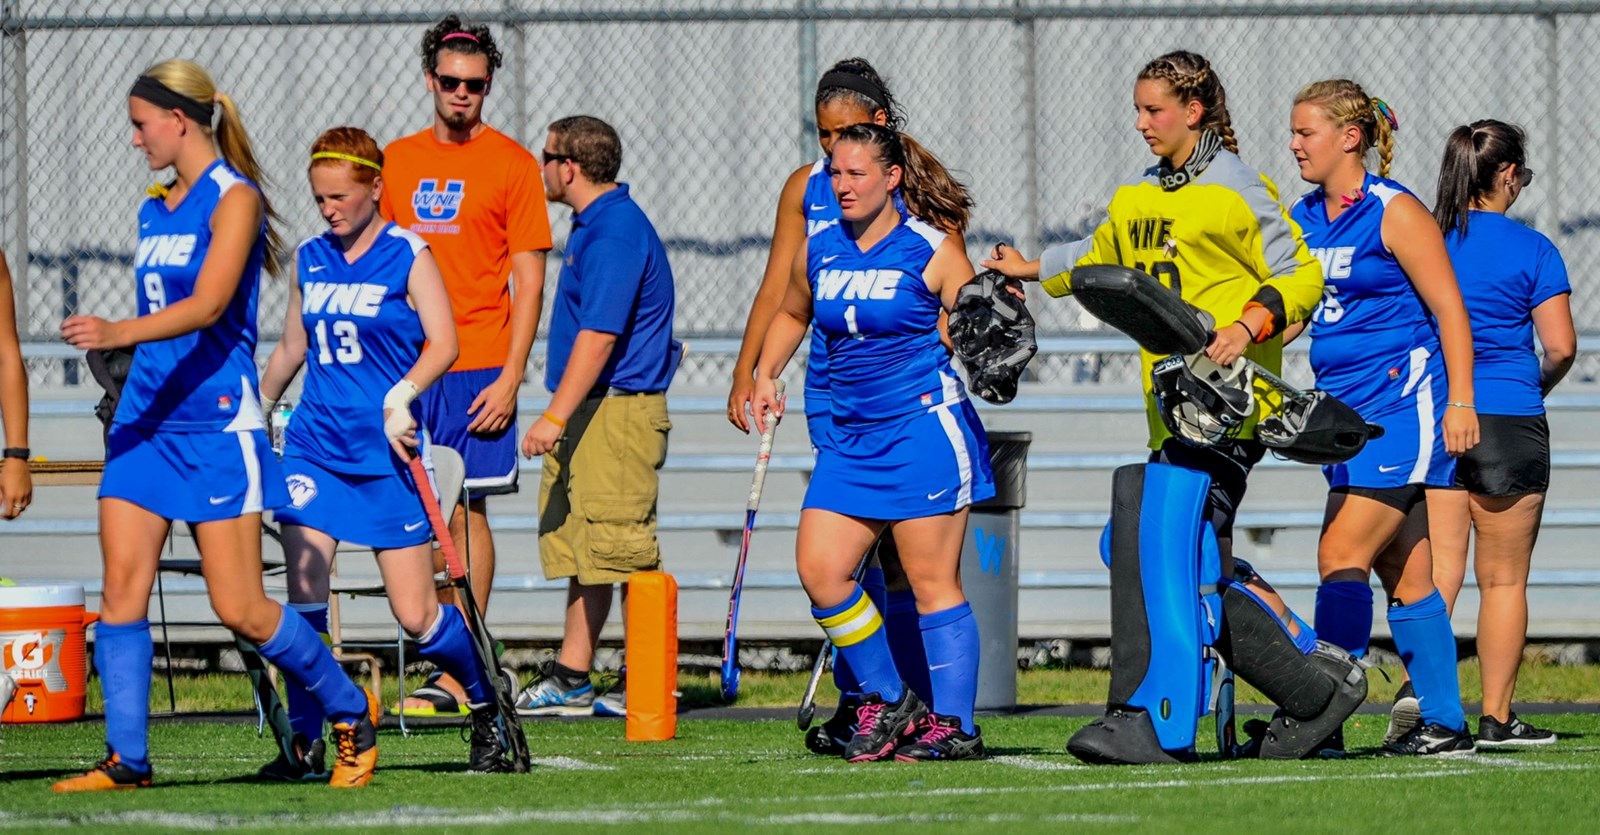 Salve Regina pull away in the second half for 5-0 conference victory over Golden Bears